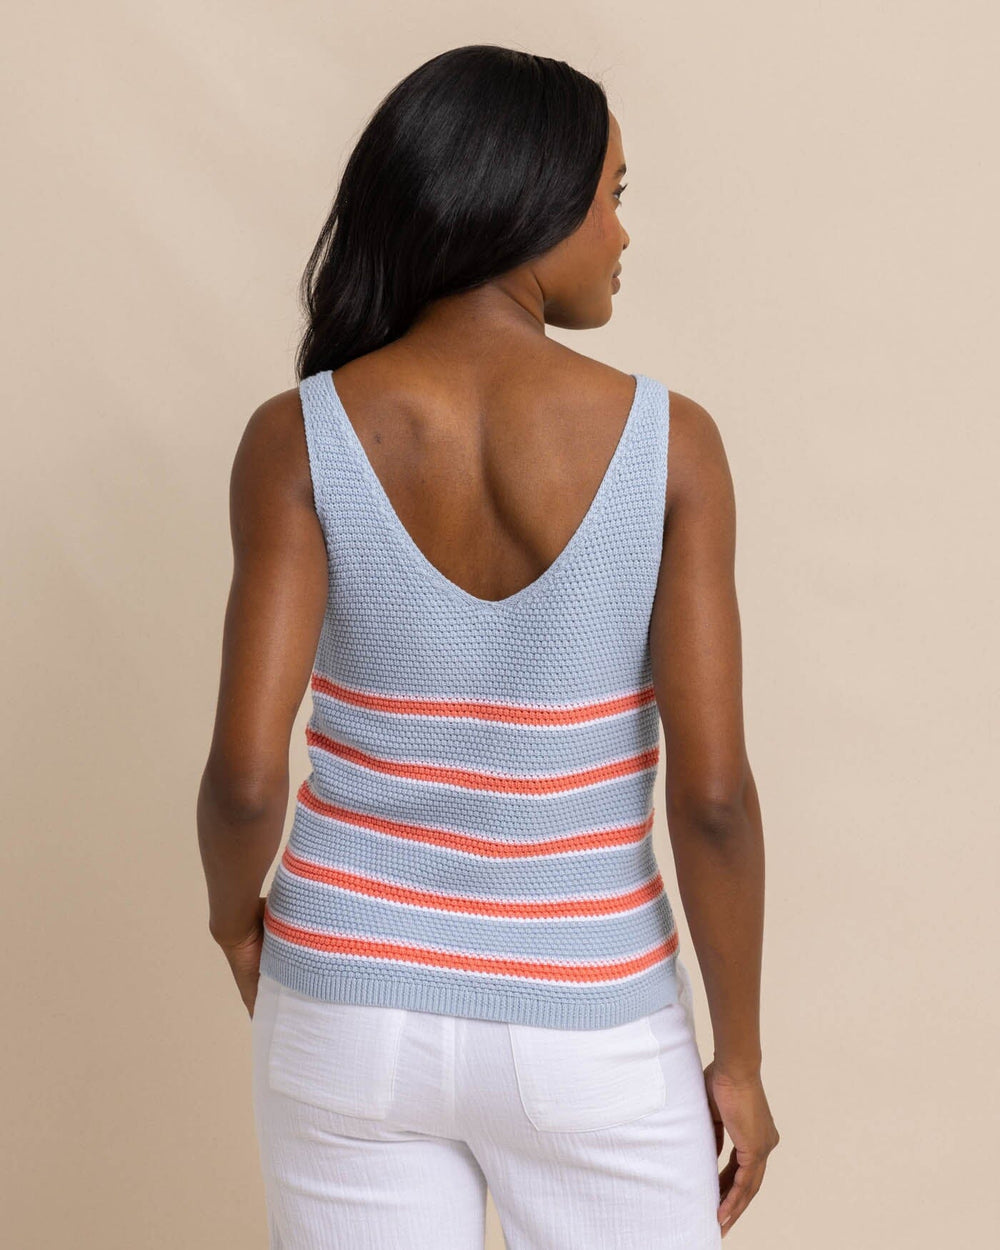 The back view of the Southern Tide Alli Striped Sweater Tank by Southern Tide - Subdued Blue